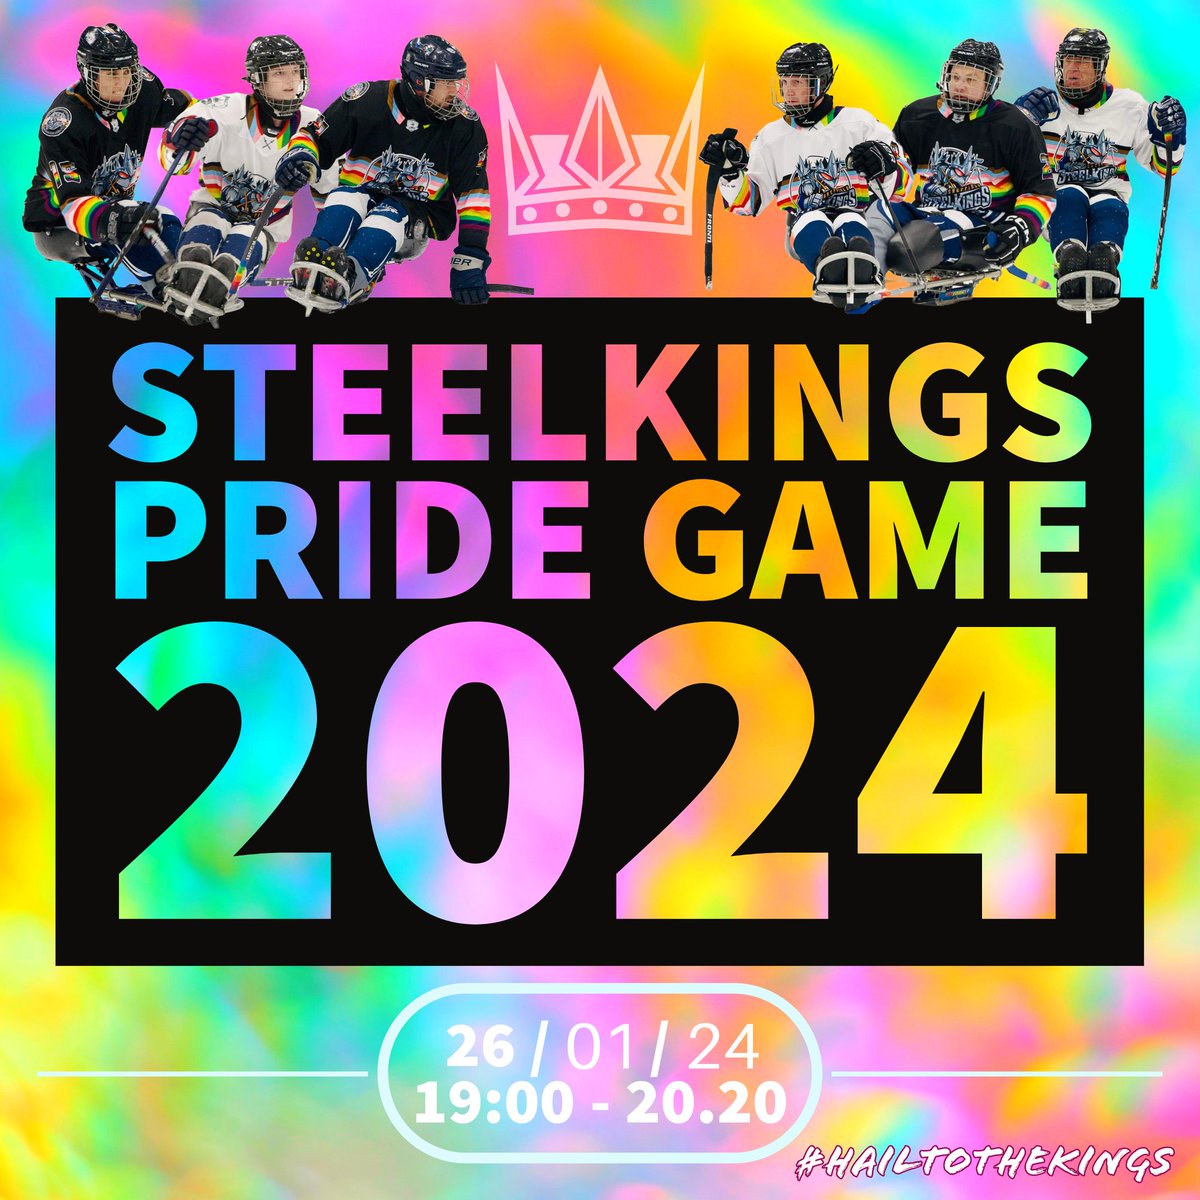 👑🏳️‍🌈 STEELKINGS PRIDE 2024 🏳️‍⚧️👑 Join us on Friday 26th January as we turn our usual training slot into an action-packed #pride game with all your favourite Steelkings players! Join us! facebook.com/share/DACgwth7… #HailToTheKings 👑 #PrideWeek #ParaIceHockey #HockeyIsForEveryone